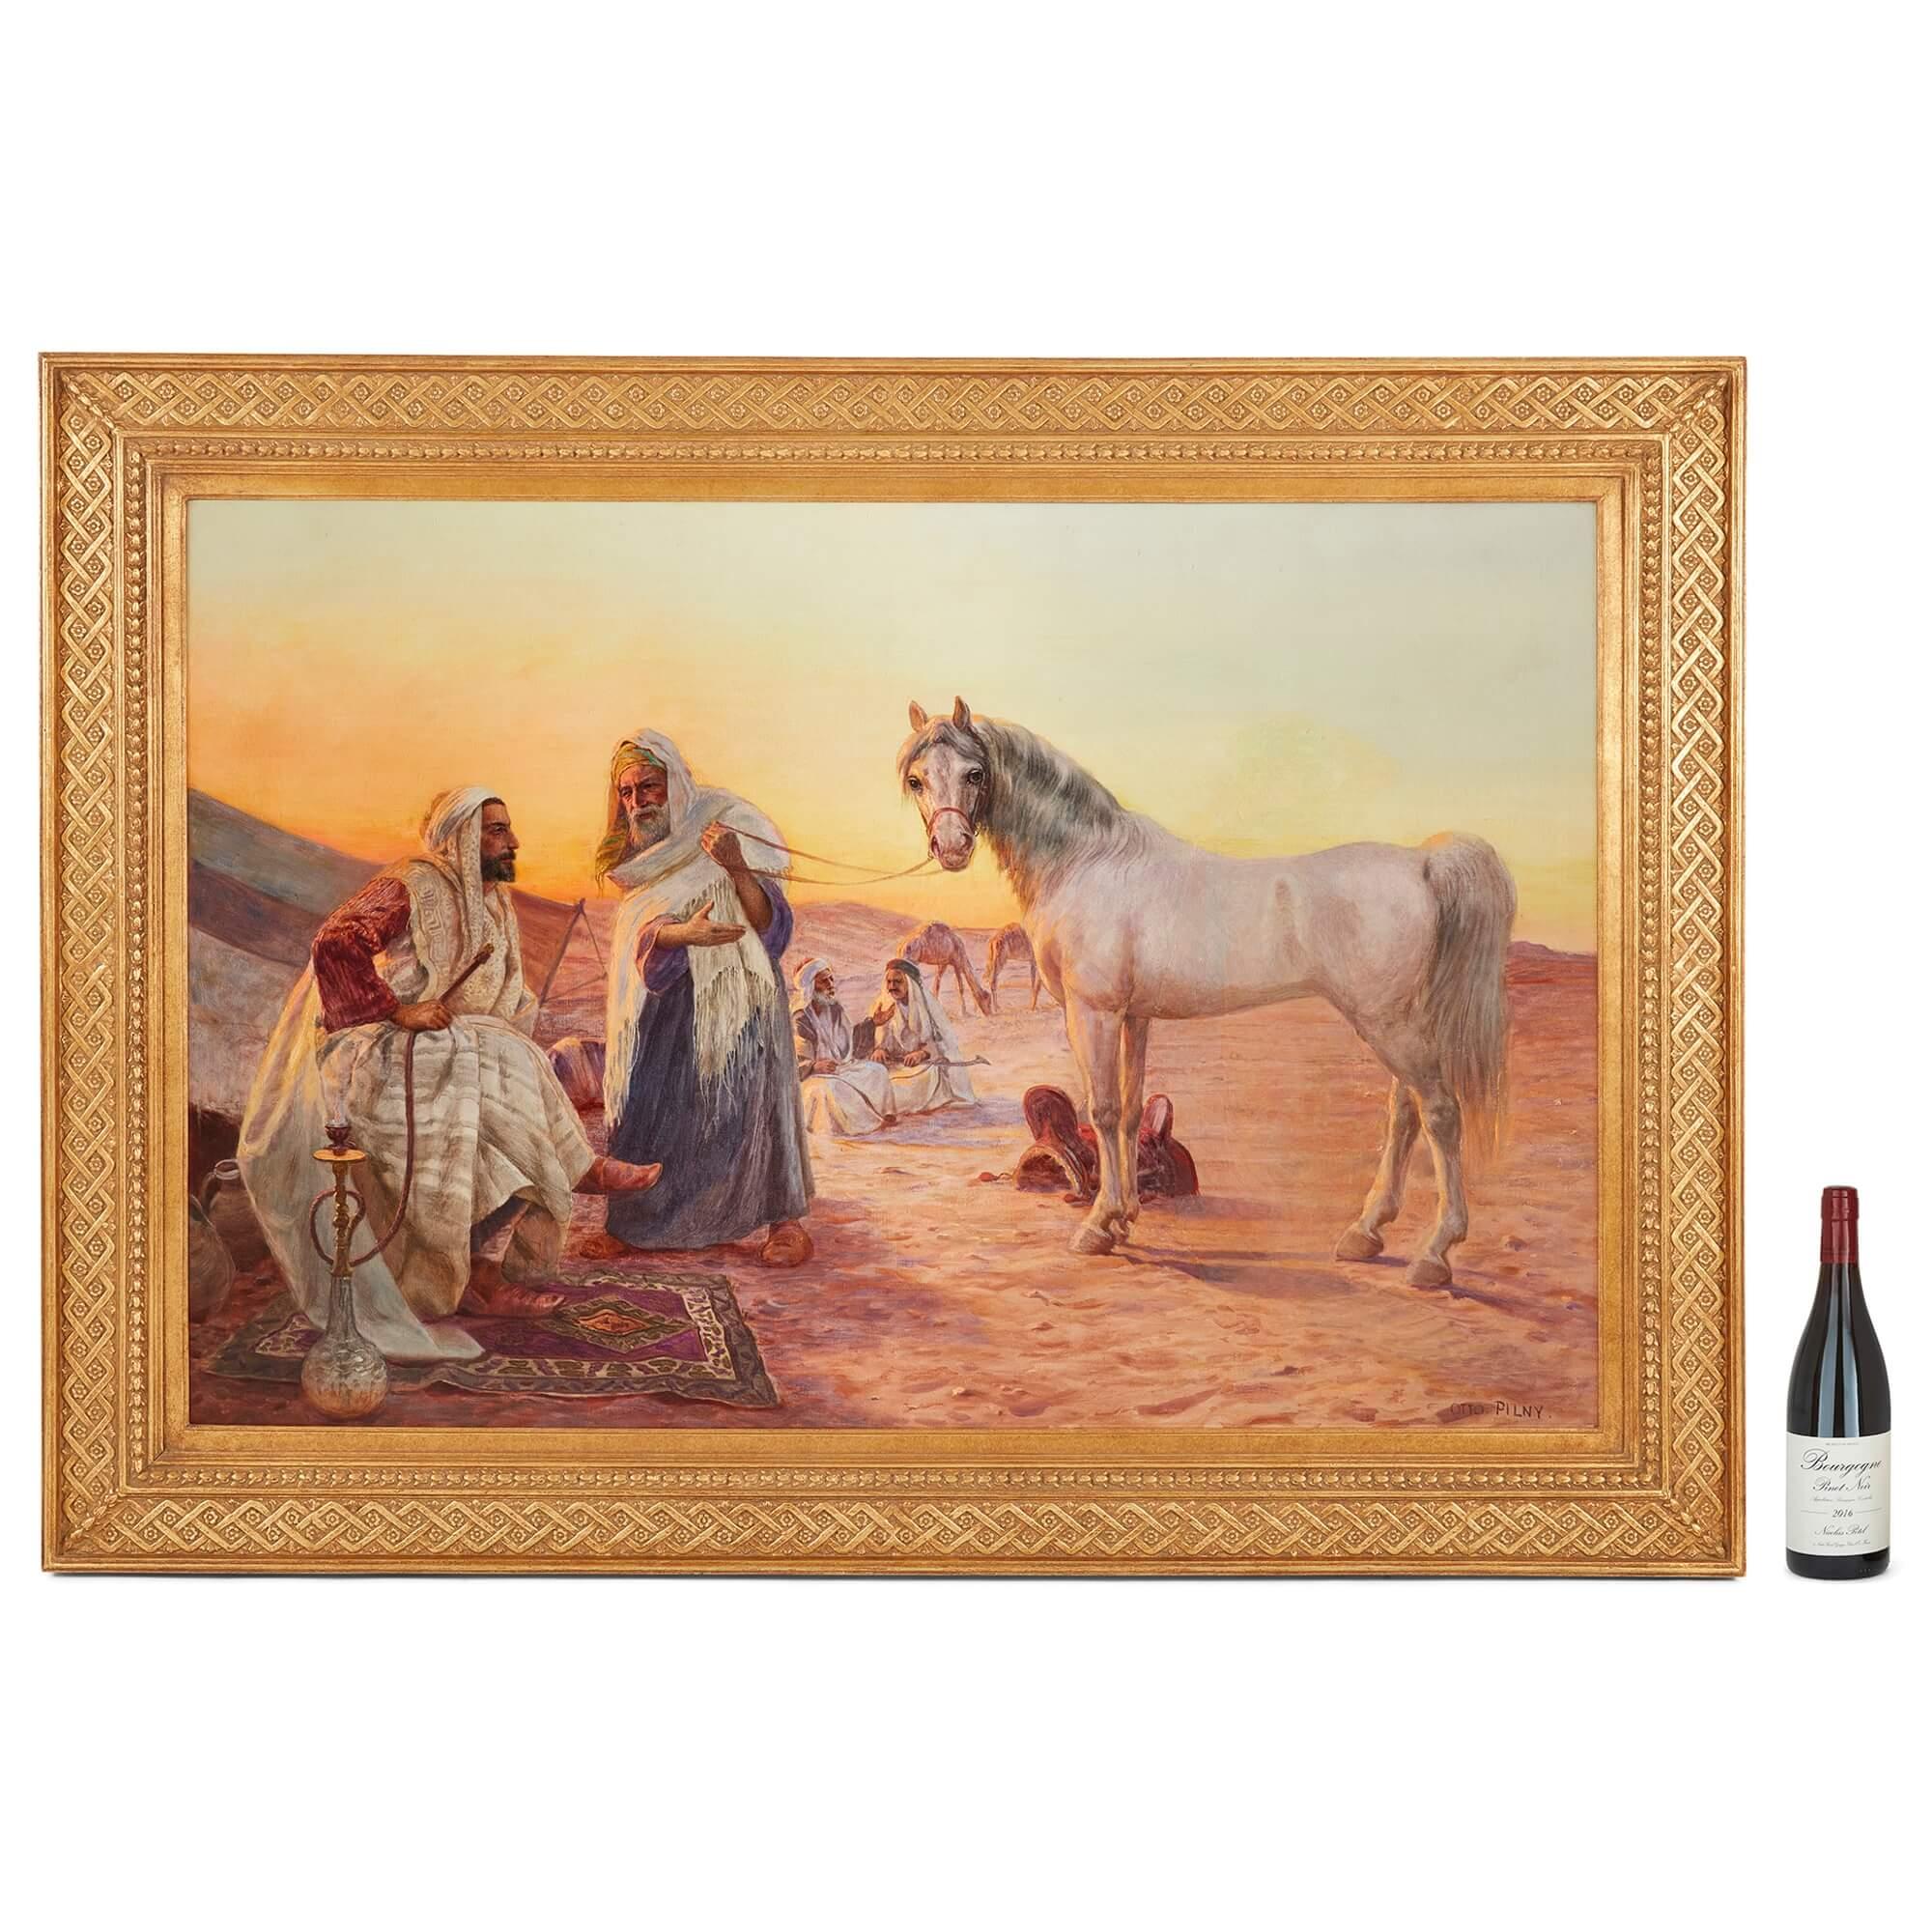 Orientalist Oil Painting Depicting the Trade of a Horse by Pilny For Sale 4